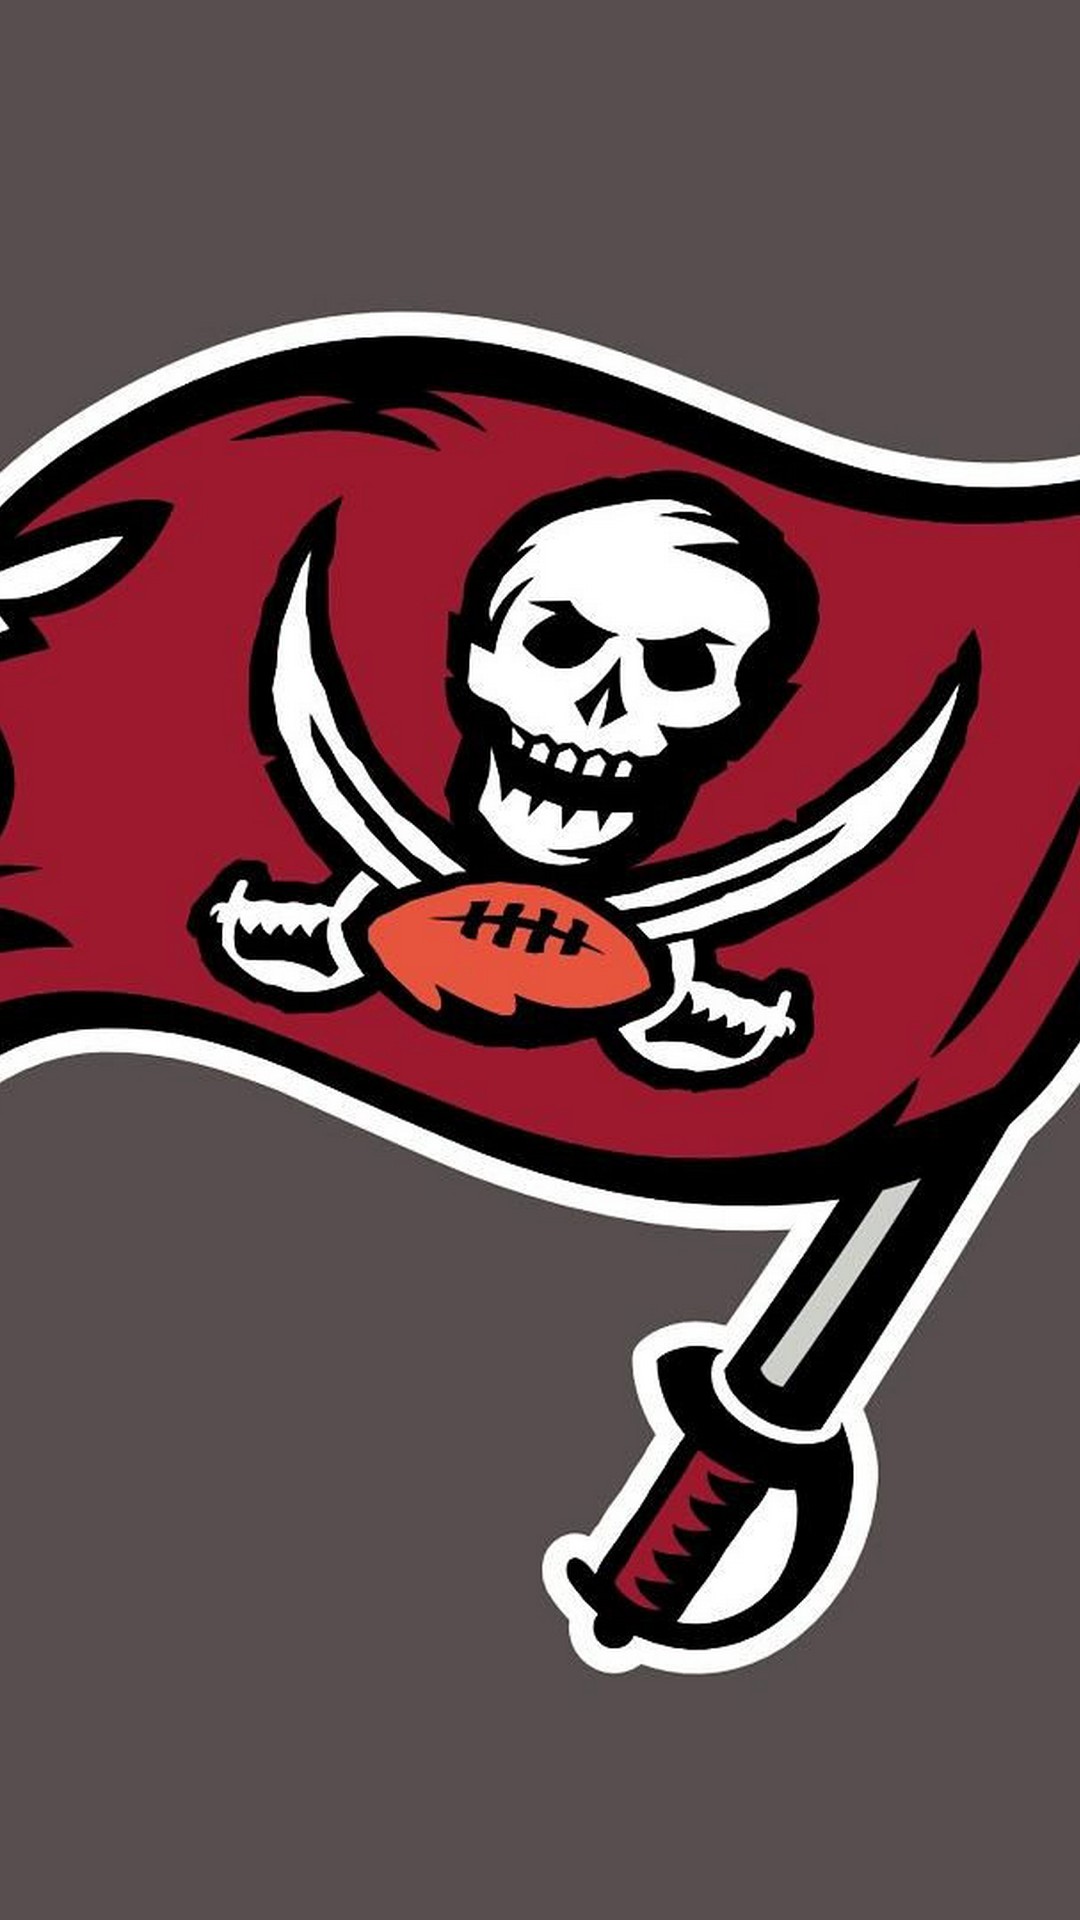 iPhone Wallpaper HD Tampa Bay Buccaneers with high-resolution 1080x1920 pixel. You can use this wallpaper for your Mac or Windows Desktop Background, iPhone, Android or Tablet and another Smartphone device